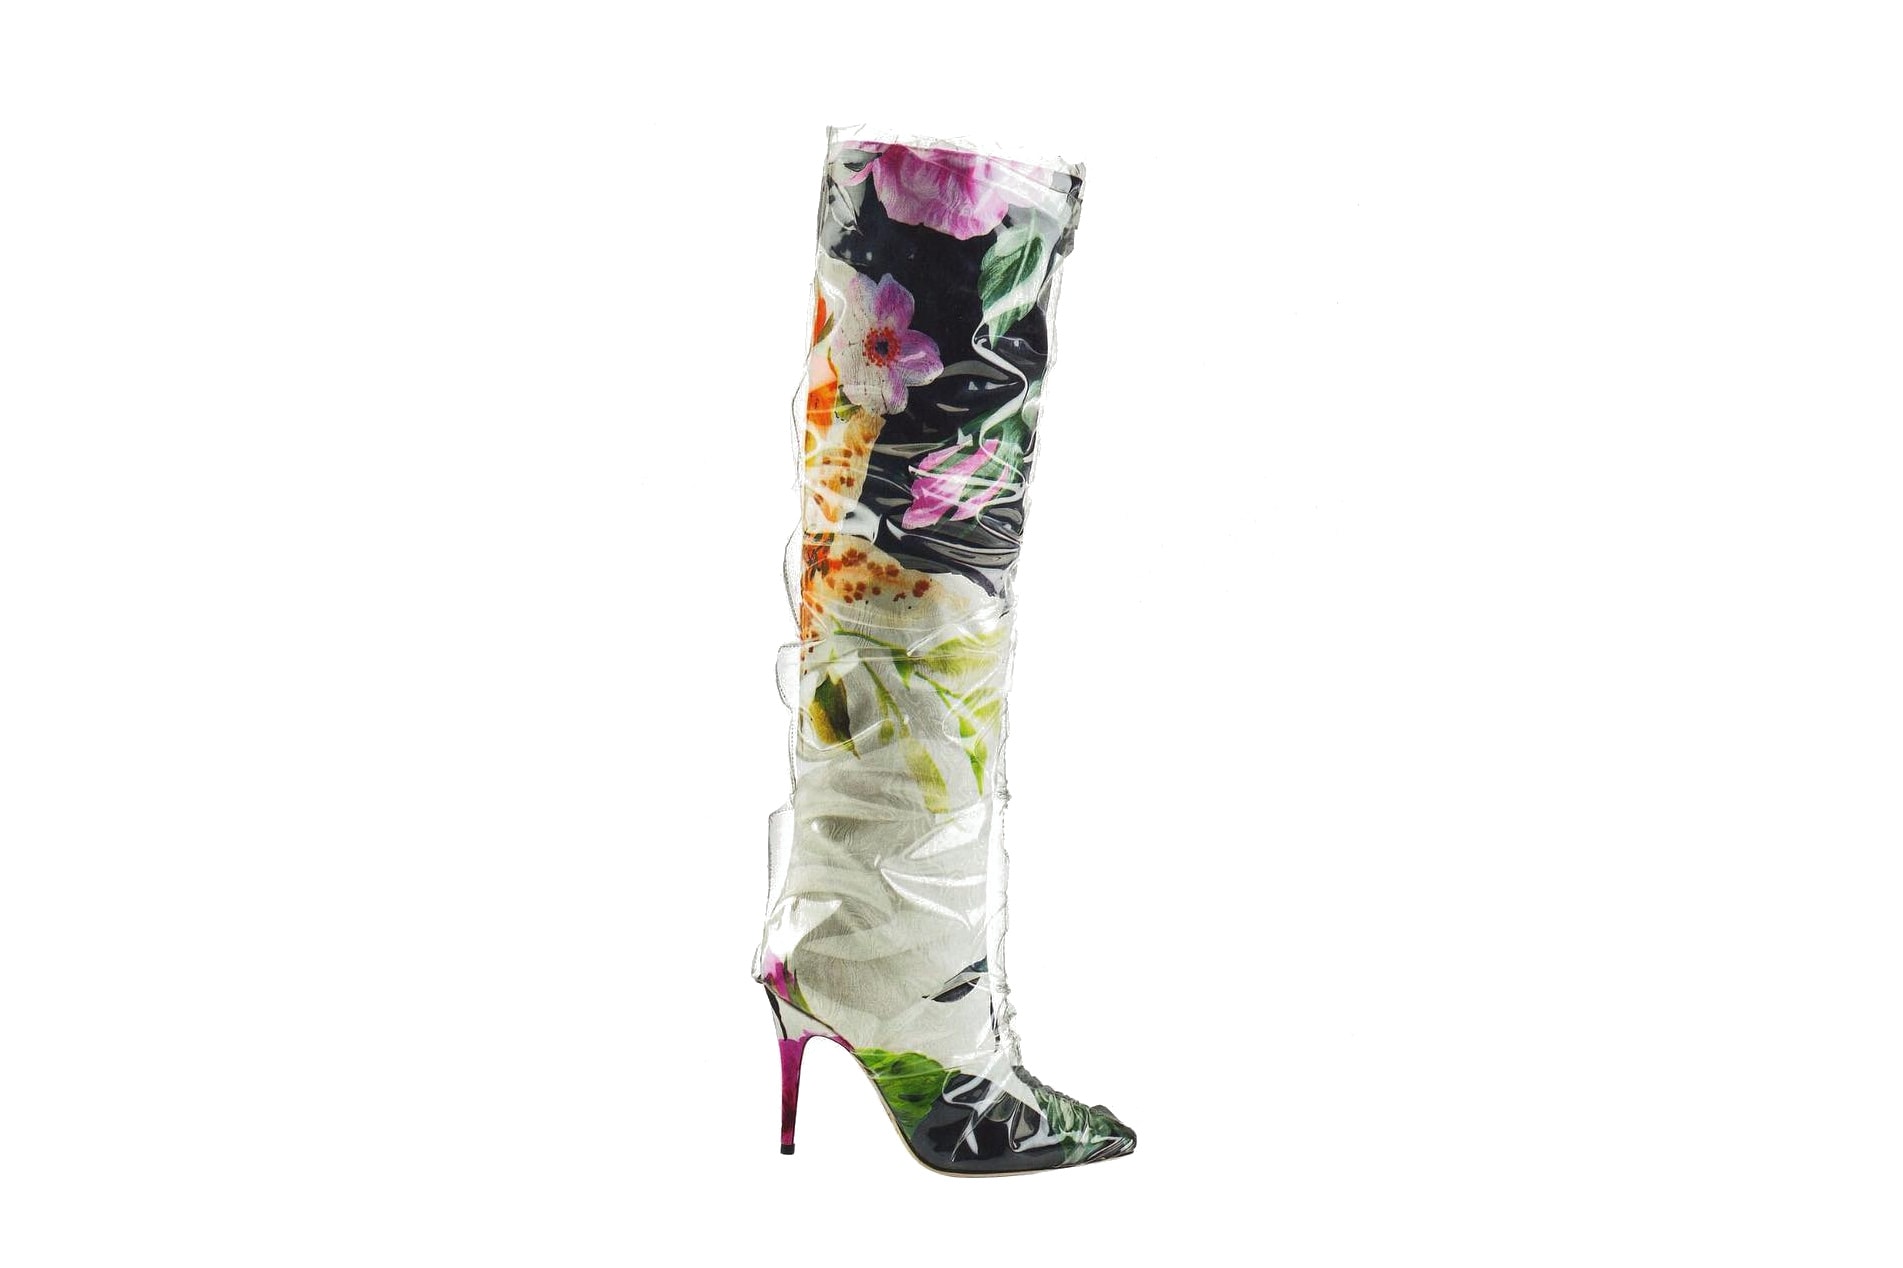 Jimmy Choo x Off-White™ Floral PVC Knee-High Boots Collaboration Spring Summer